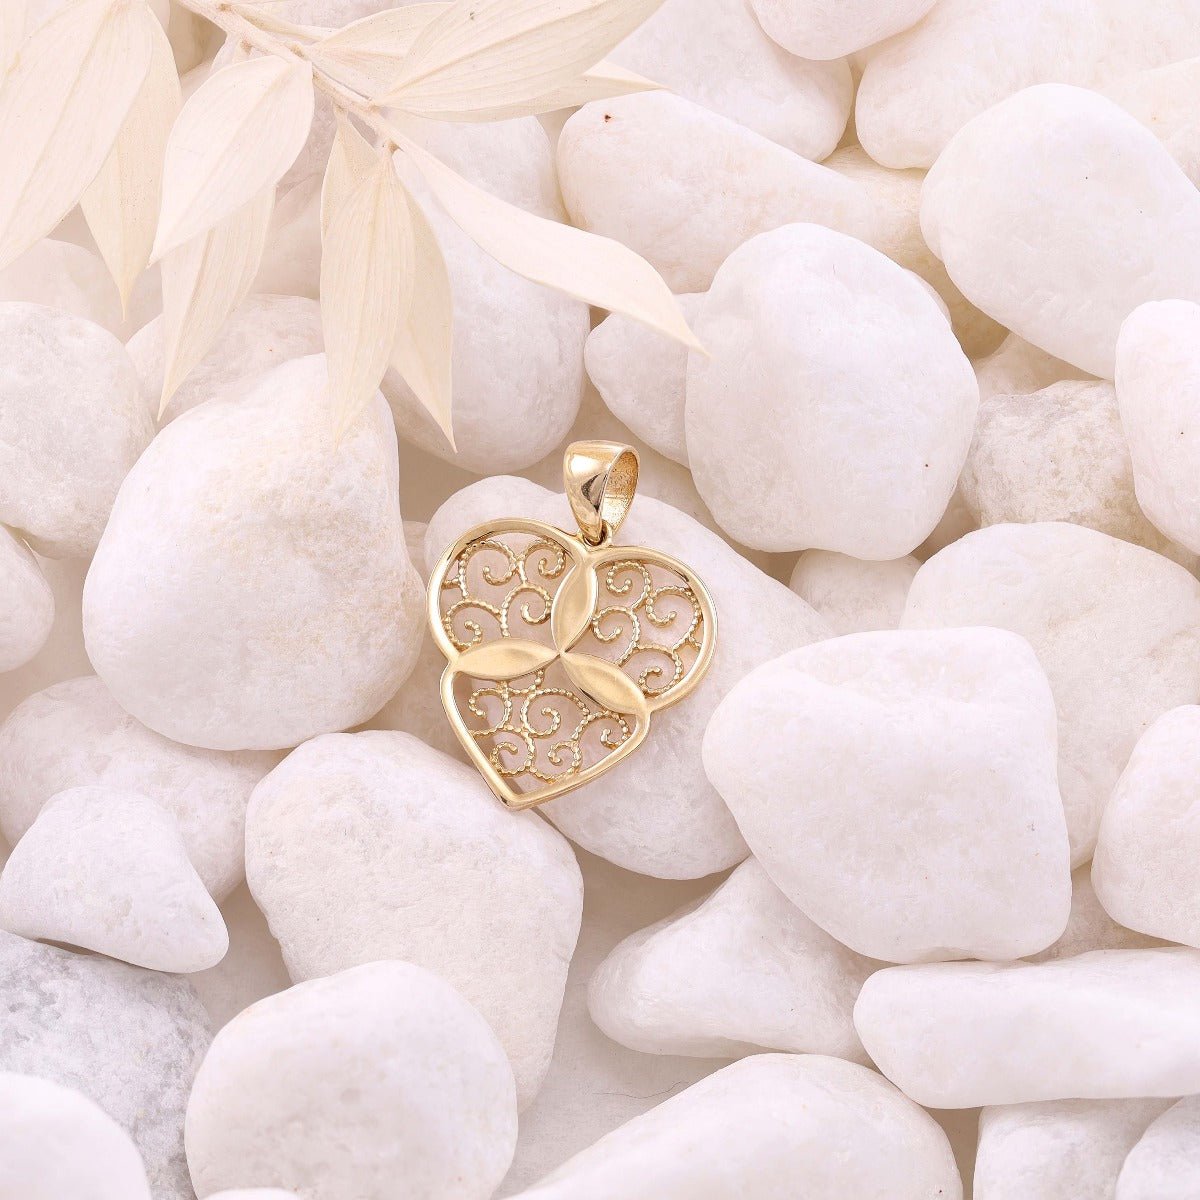 9ct Gold Abstract Patterned Triple Shaped Heart Pendant - 26mm - FJewellery